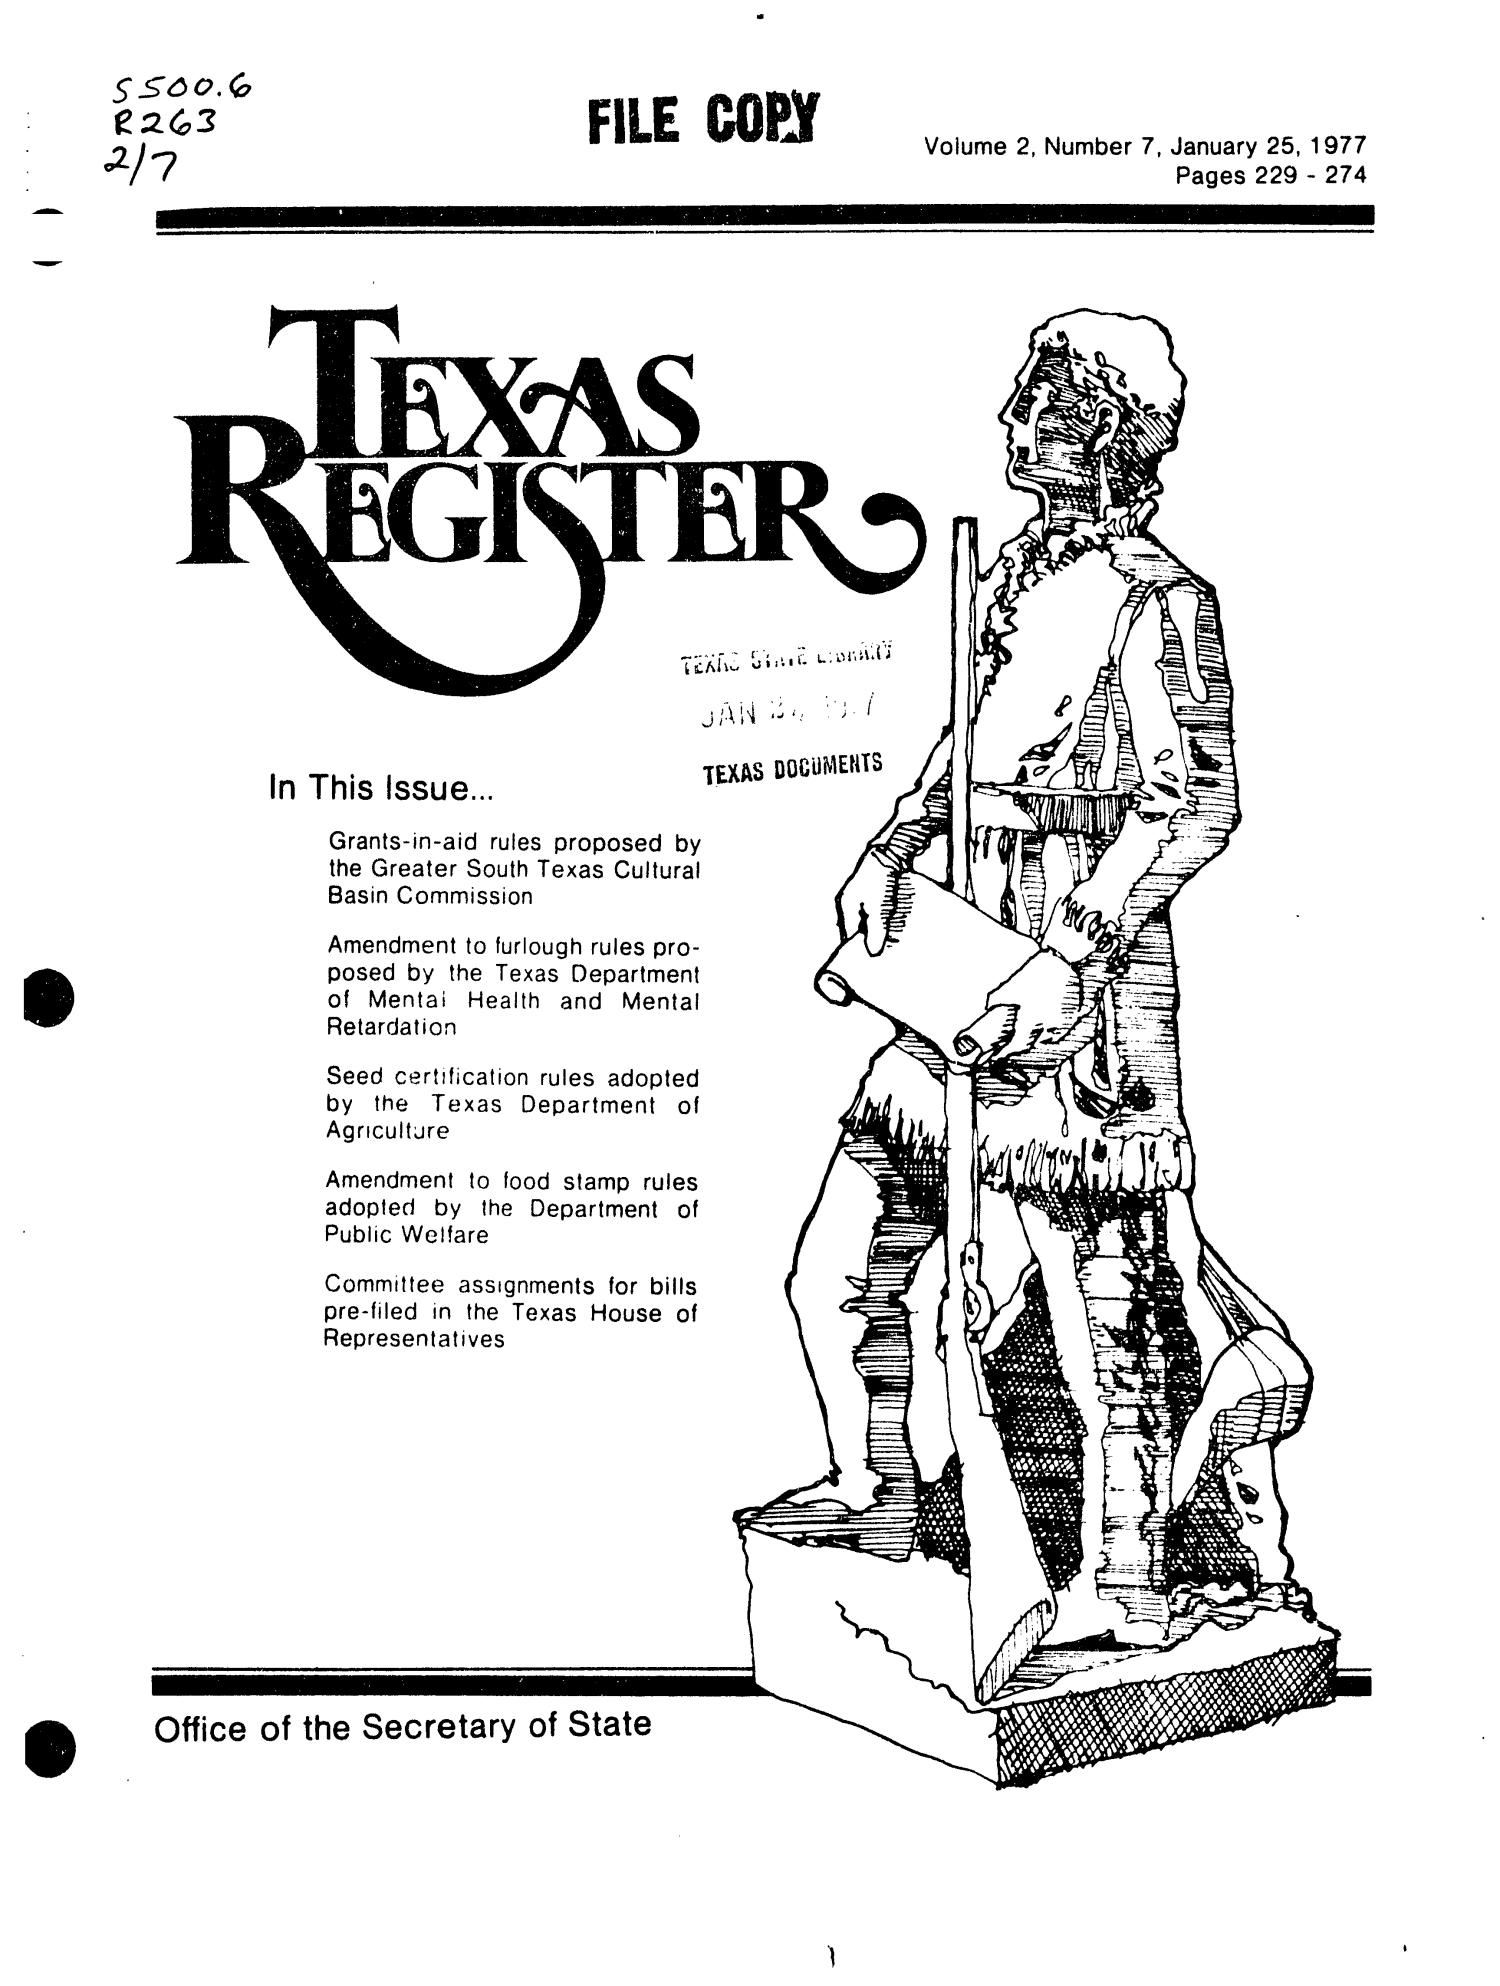 Texas Register, Volume 2, Number 7, Pages 229-274, January 25, 1977
                                                
                                                    Title Page
                                                